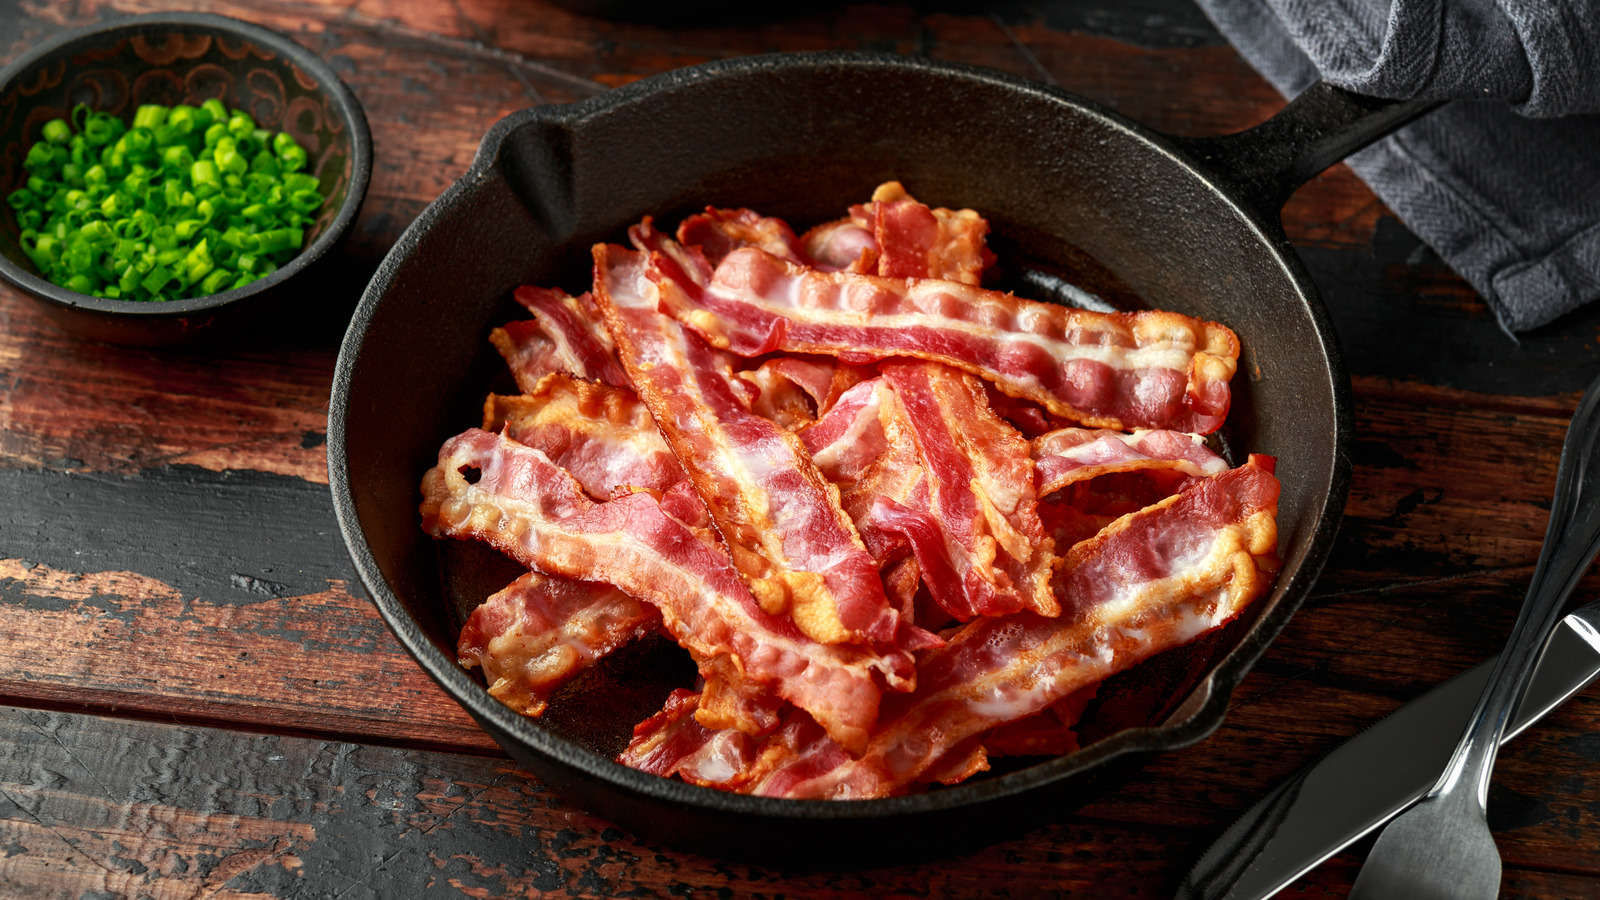 https://www.tastingtable.com/img/gallery/the-best-way-to-prevent-bacon-from-sticking-to-a-cast-iron-skillet/l-intro-1652993641.jpg